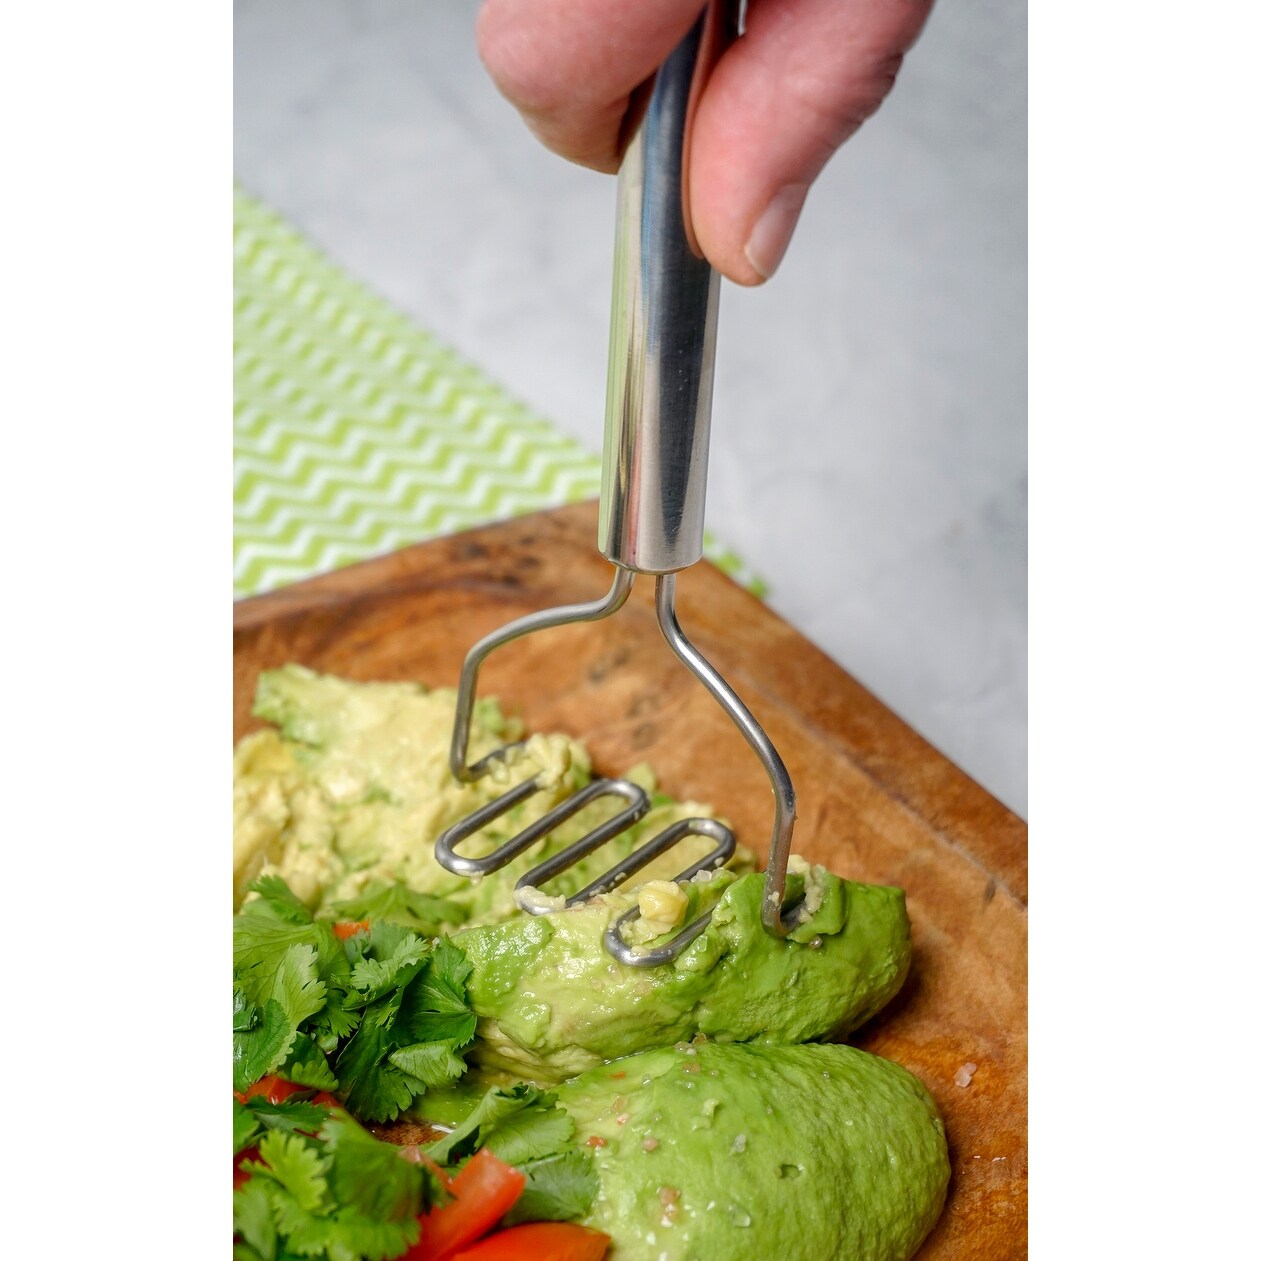 https://ak1.ostkcdn.com/images/products/is/images/direct/4c6e1f4b2807def1ee0d41dd015a147e6f98afb2/Avocado-Masher.jpg